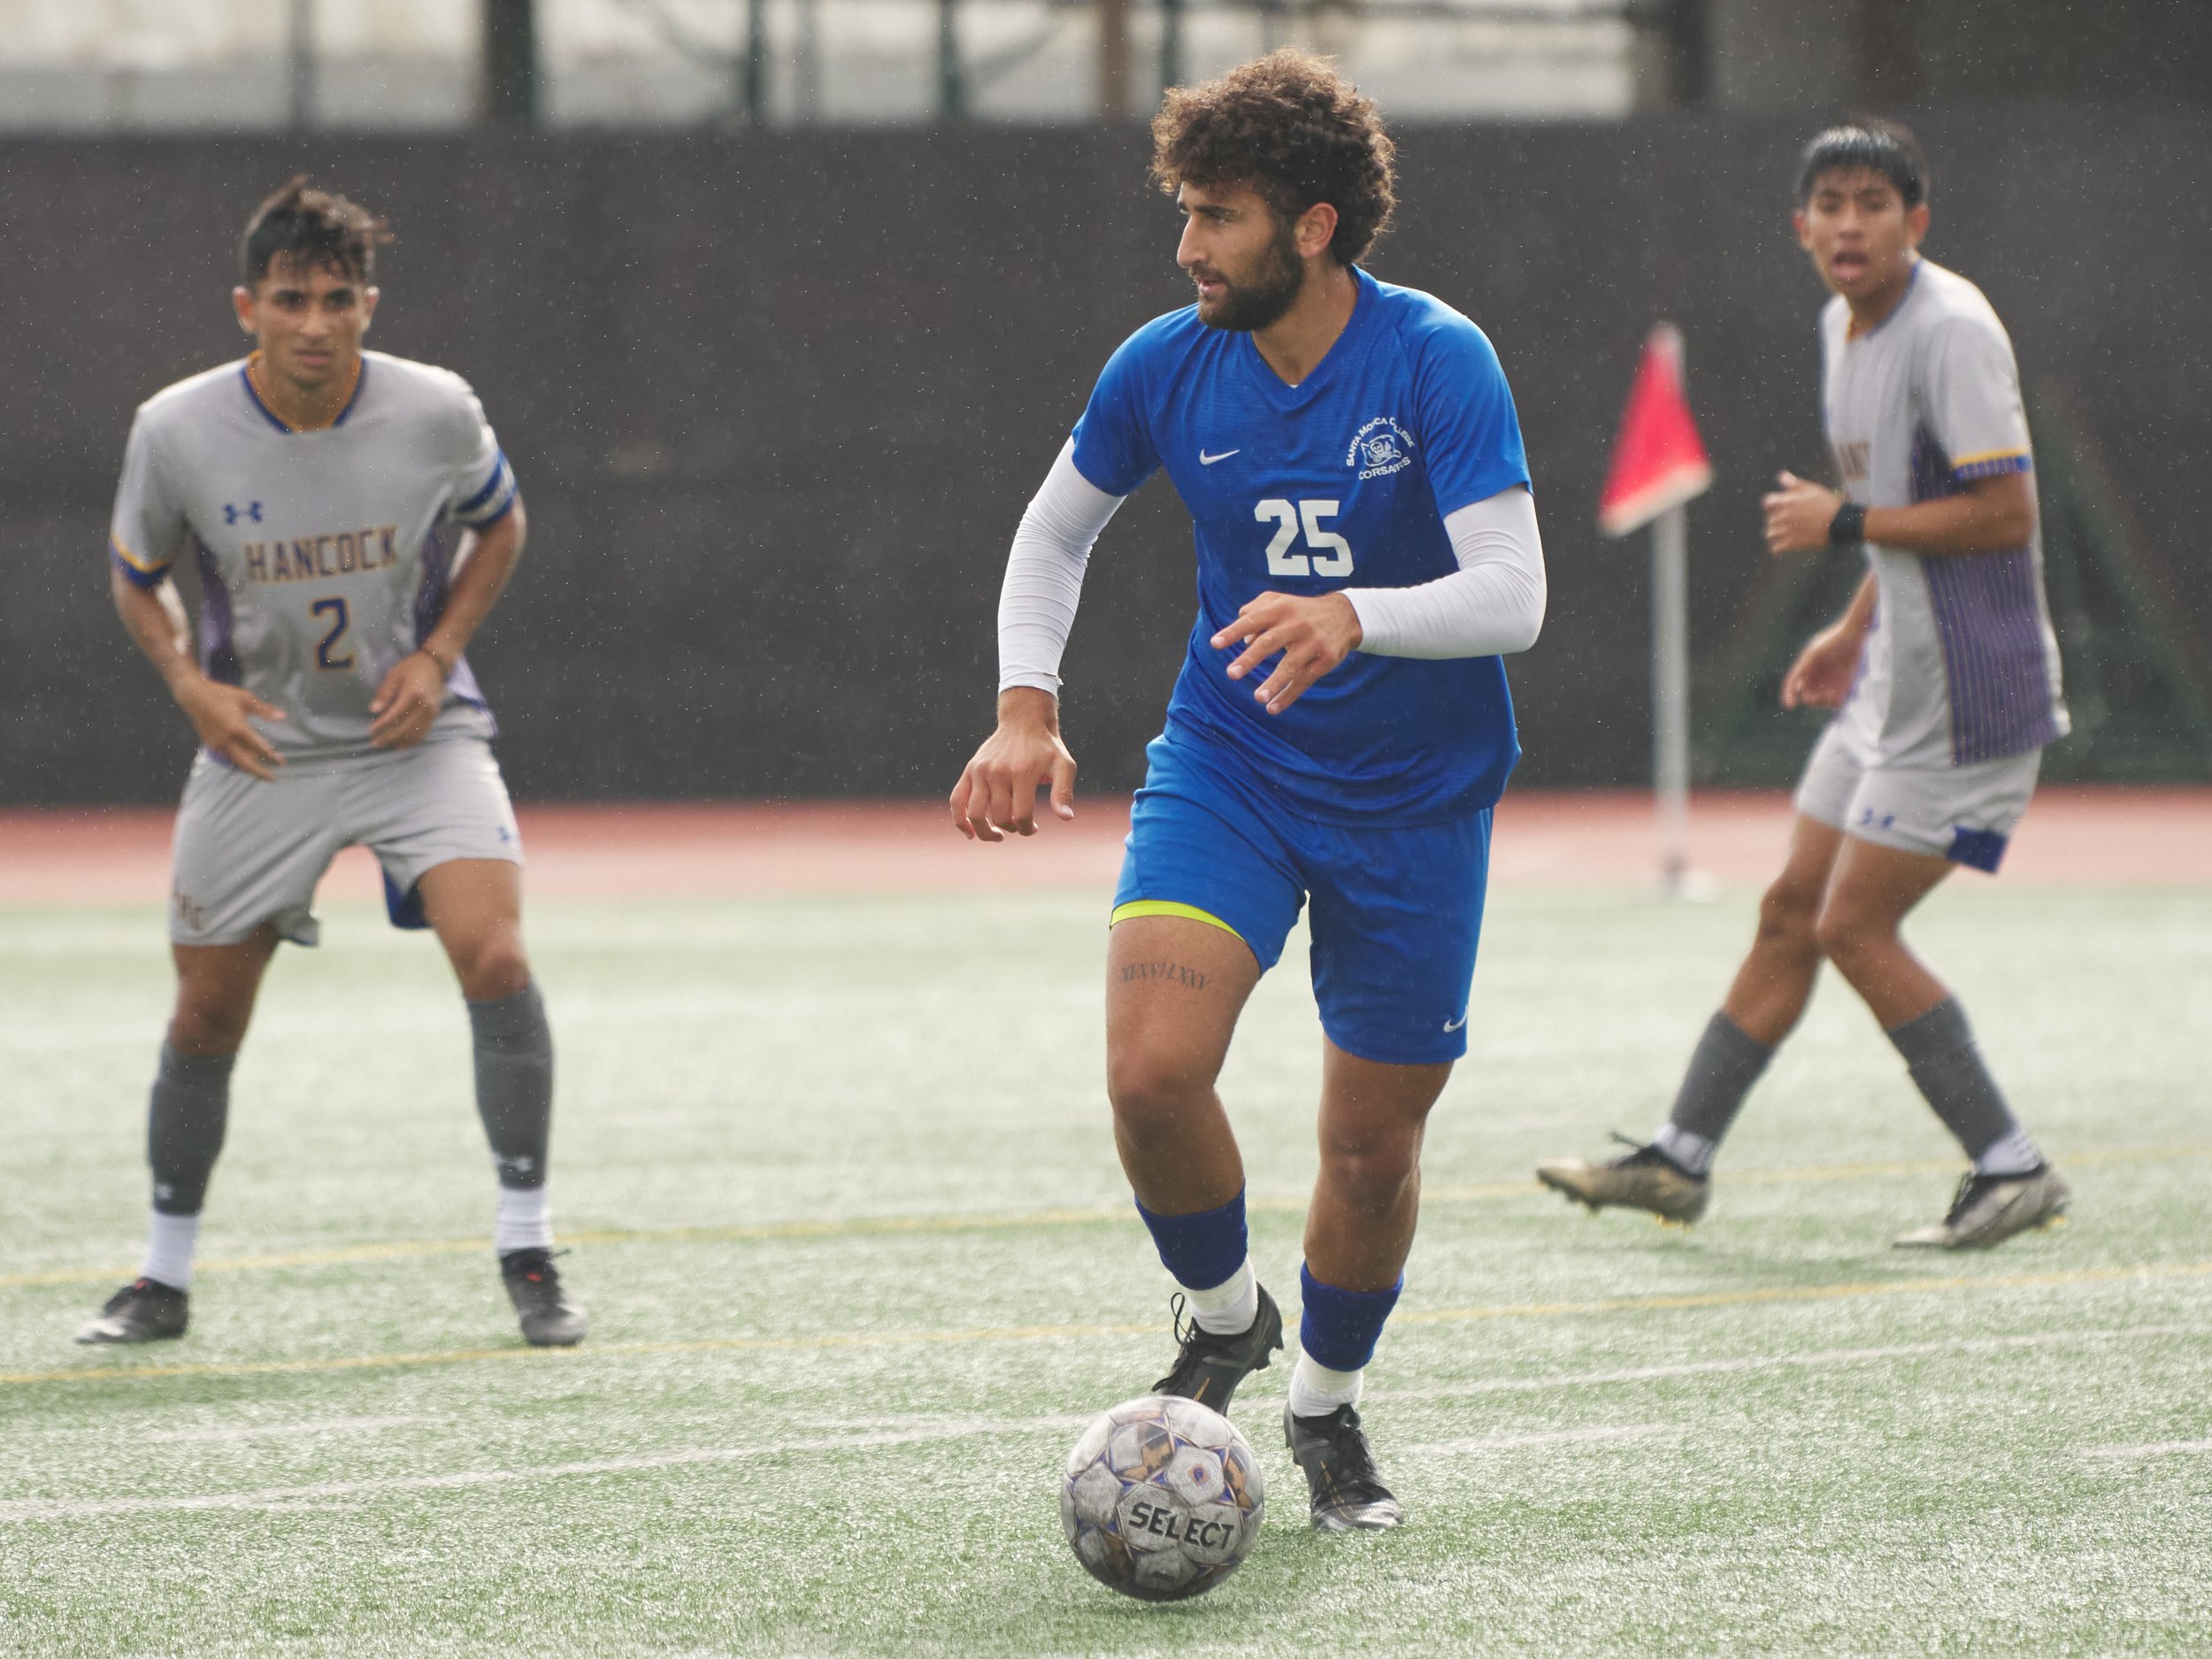  Santa Monica College Corsairs' Adam Abou-Hamad (center) and Allan Hancock College Bulldogs' Eric Diaz (left) and Oscar Monroy (right) during the men's soccer match on Tuesday, Nov. 8, 2022, at Corsair Field in Santa Monica, Calif. The Corsairs won 7